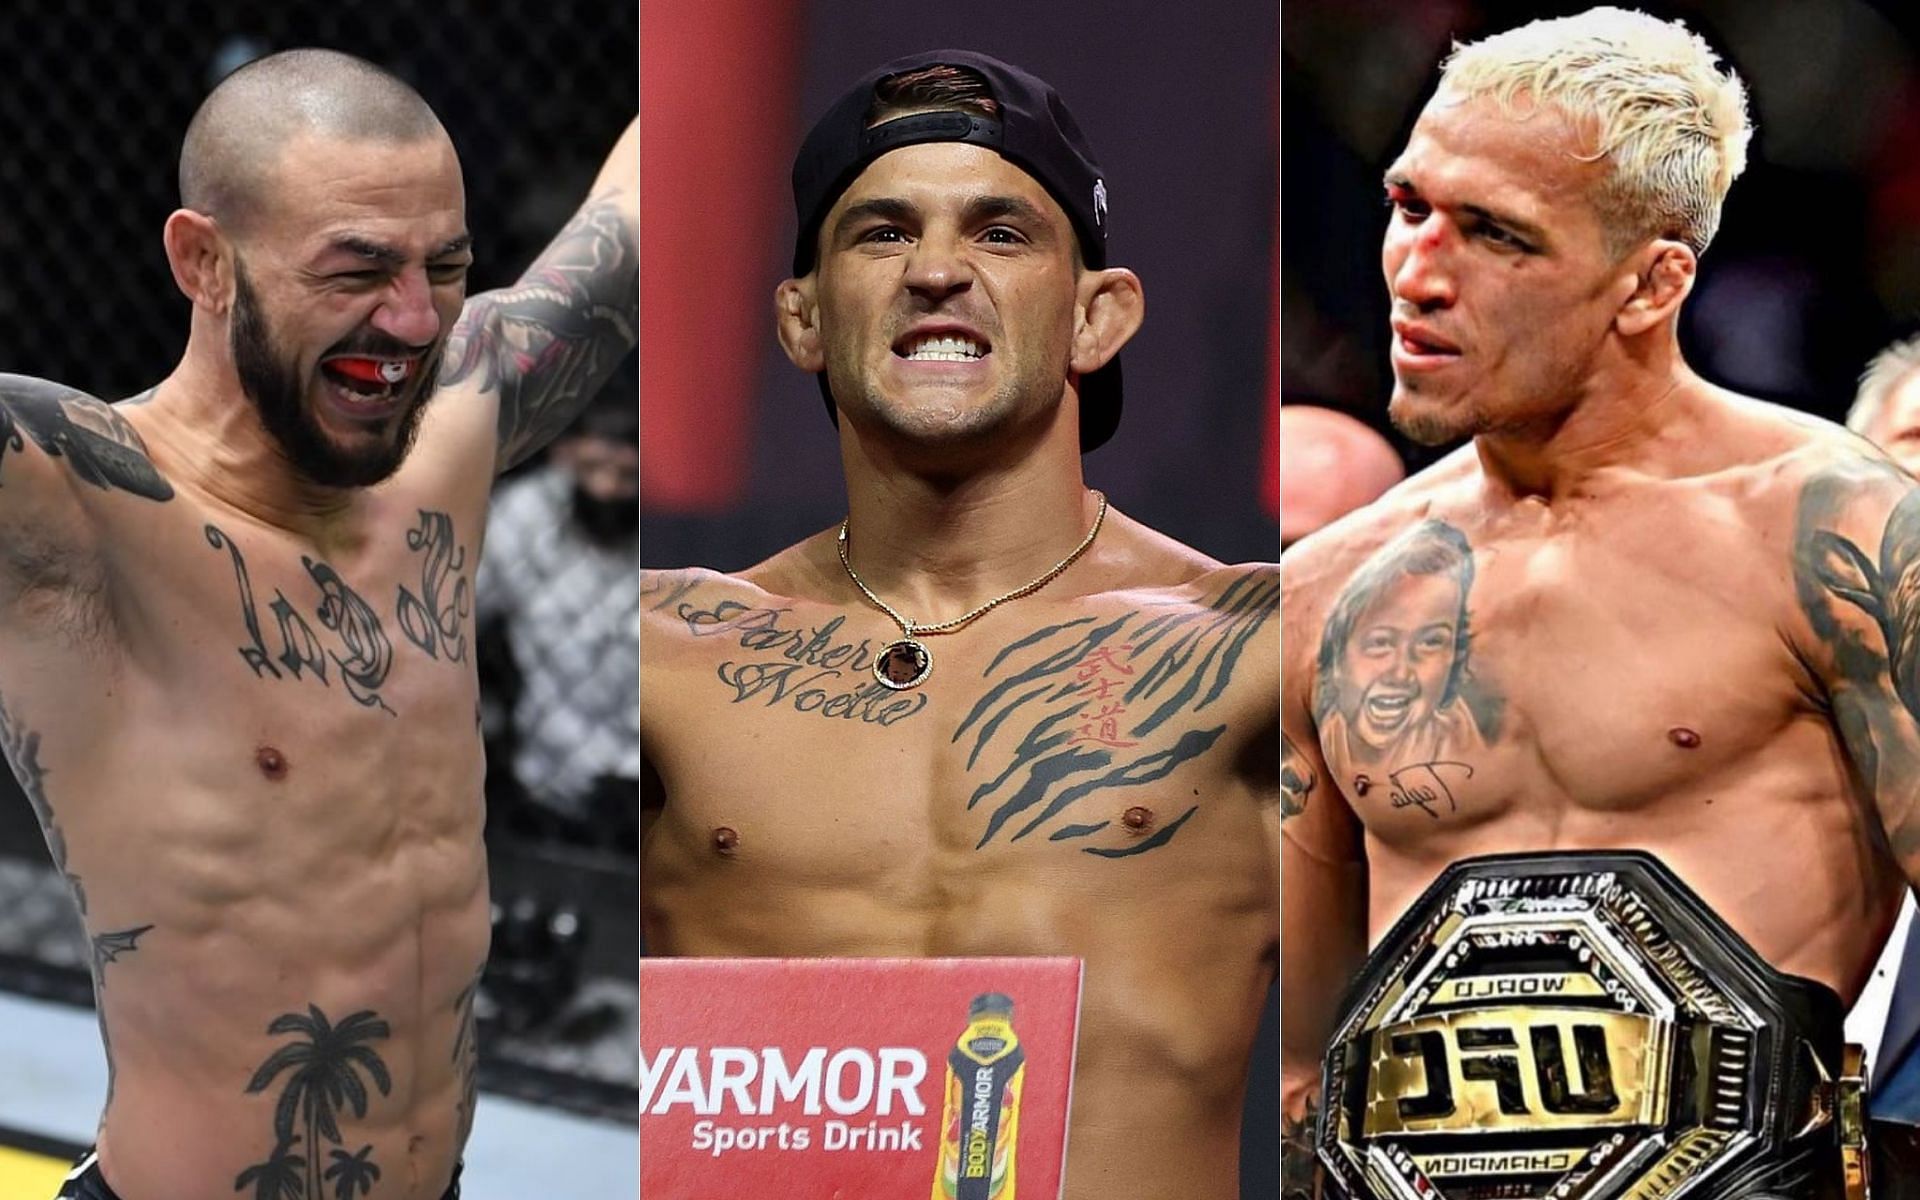 Cub Swanson (left), Dustin Poirier (middle) and Charles Oliveira (right) [Image credits: @ufc and @charlesdobronxs on Instagram]